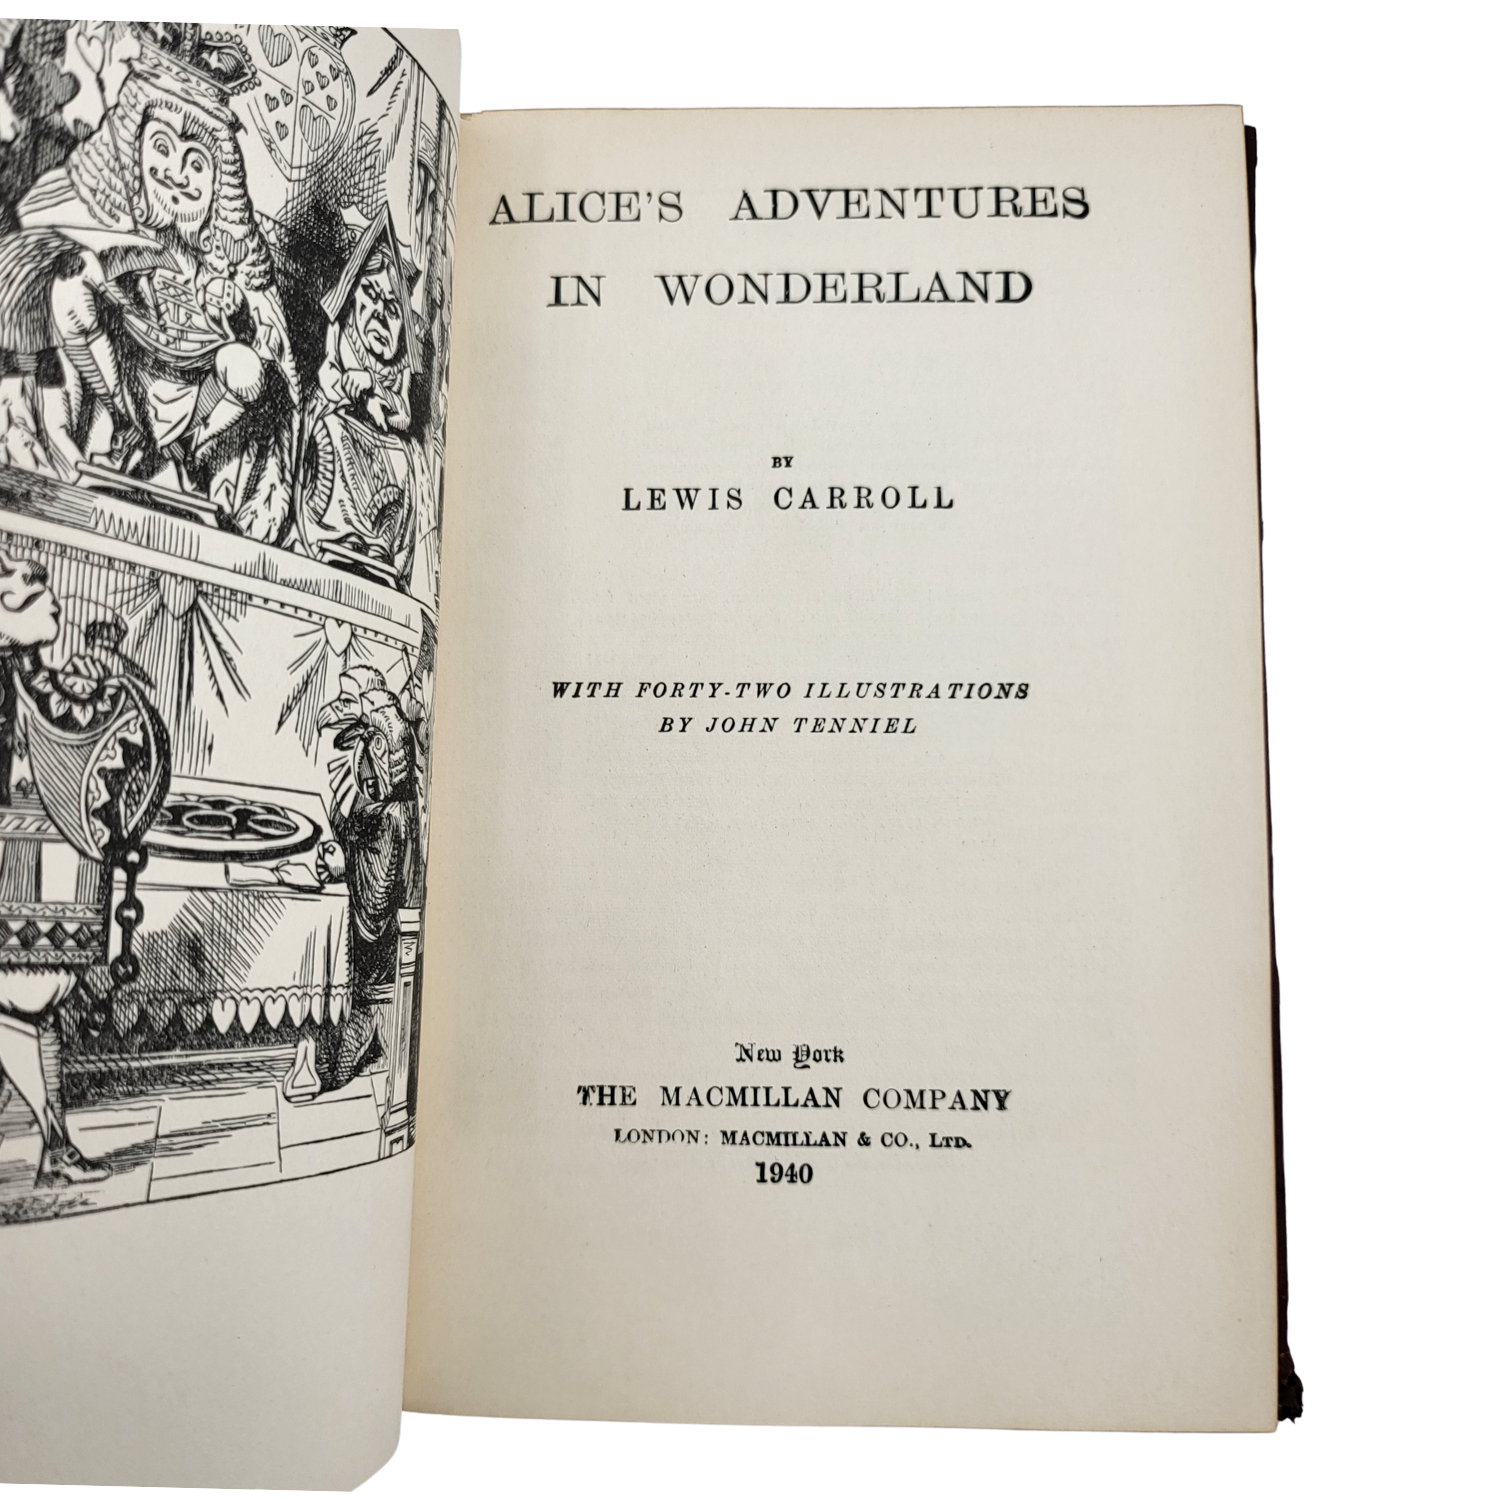 Alice's Adventures in Wonderland and Through the Looking Glass - 1940